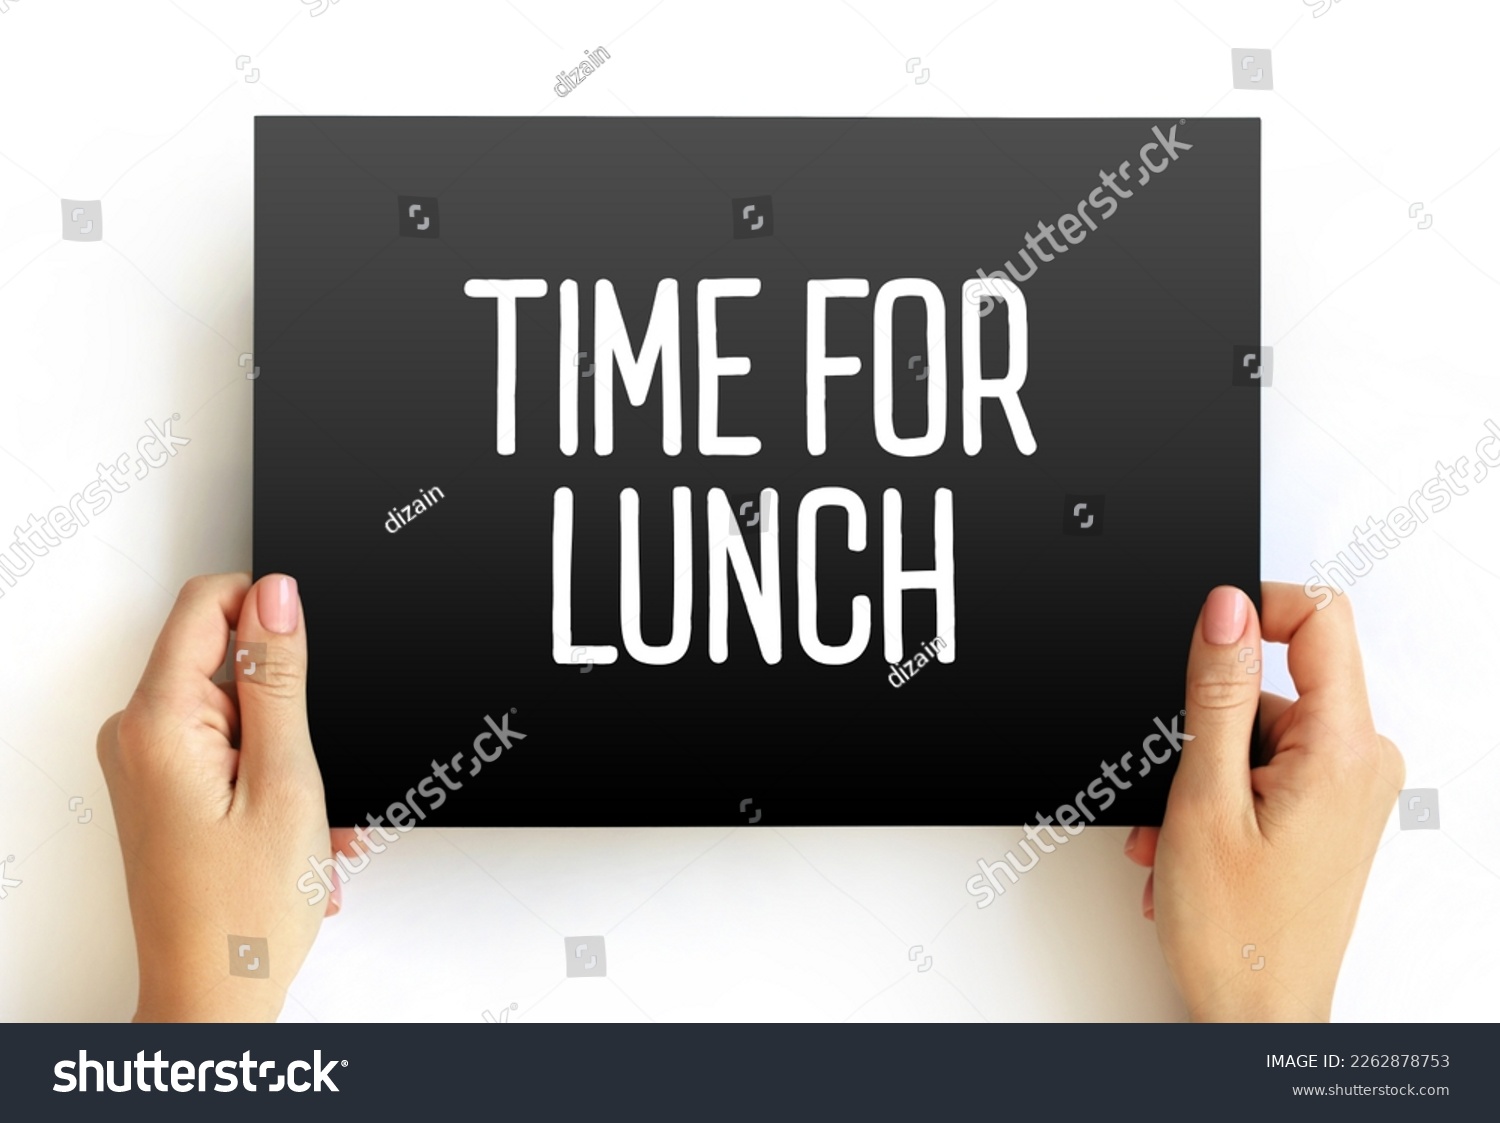 Time For Lunch text on card, concept background #2262878753